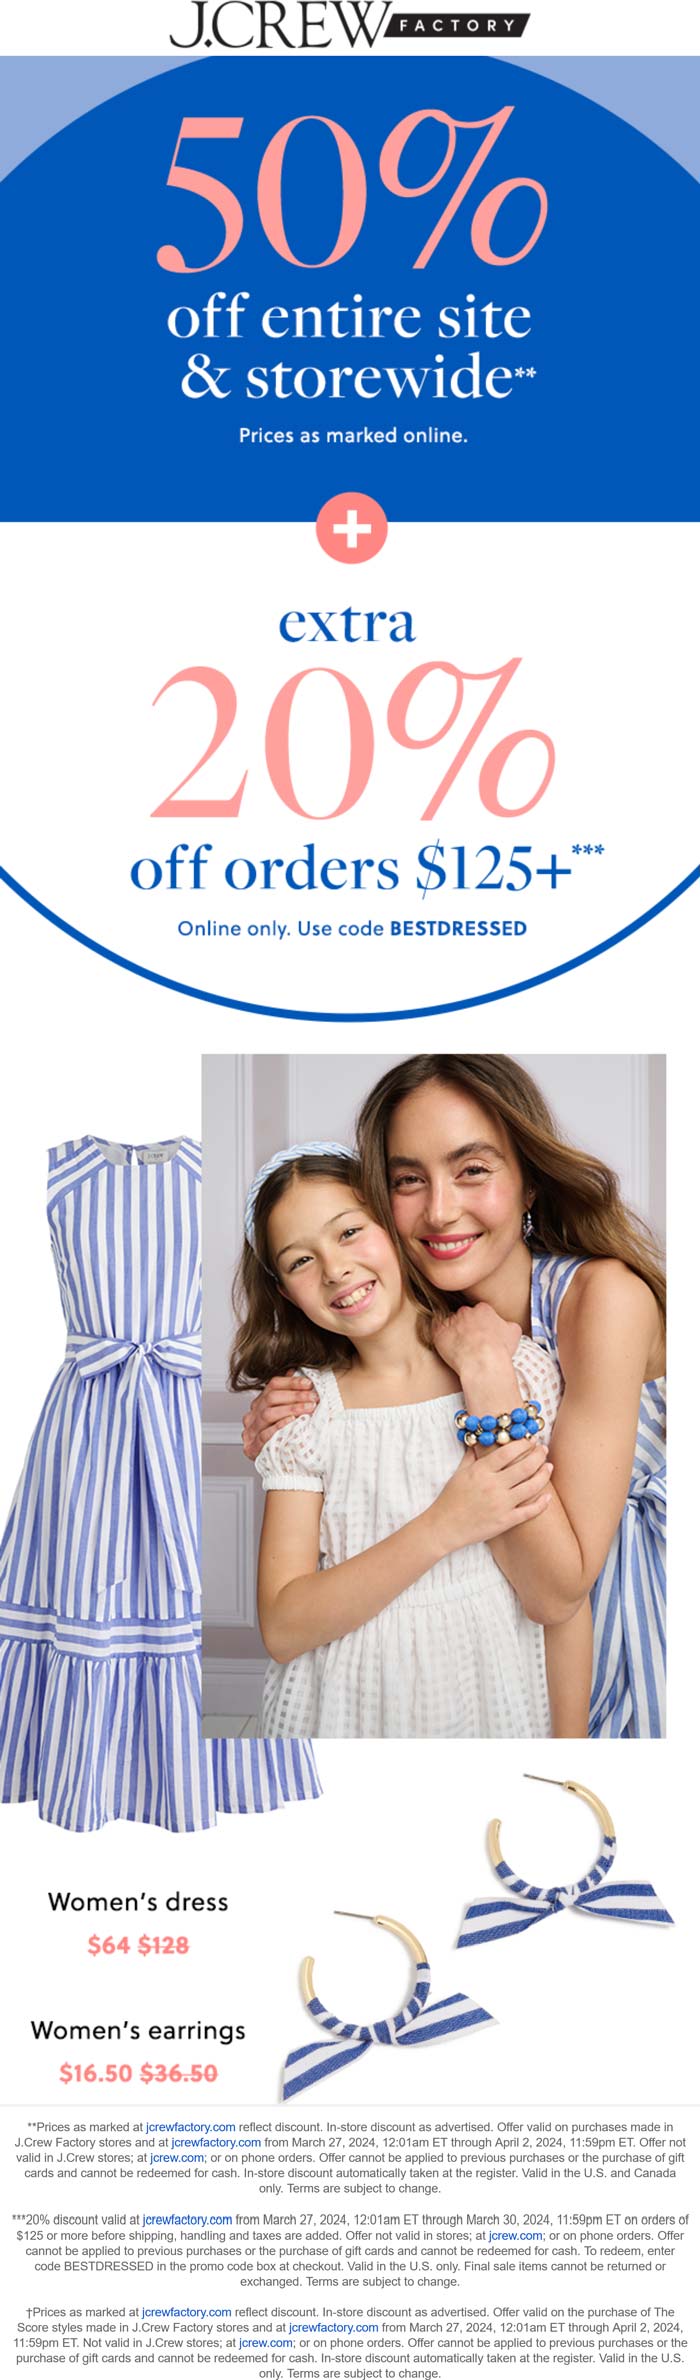 J.Crew Factory stores Coupon  50% off everything at J.Crew Factory, ditto online + 20% off $125 via promo BESTDRESSED #jcrewfactory 